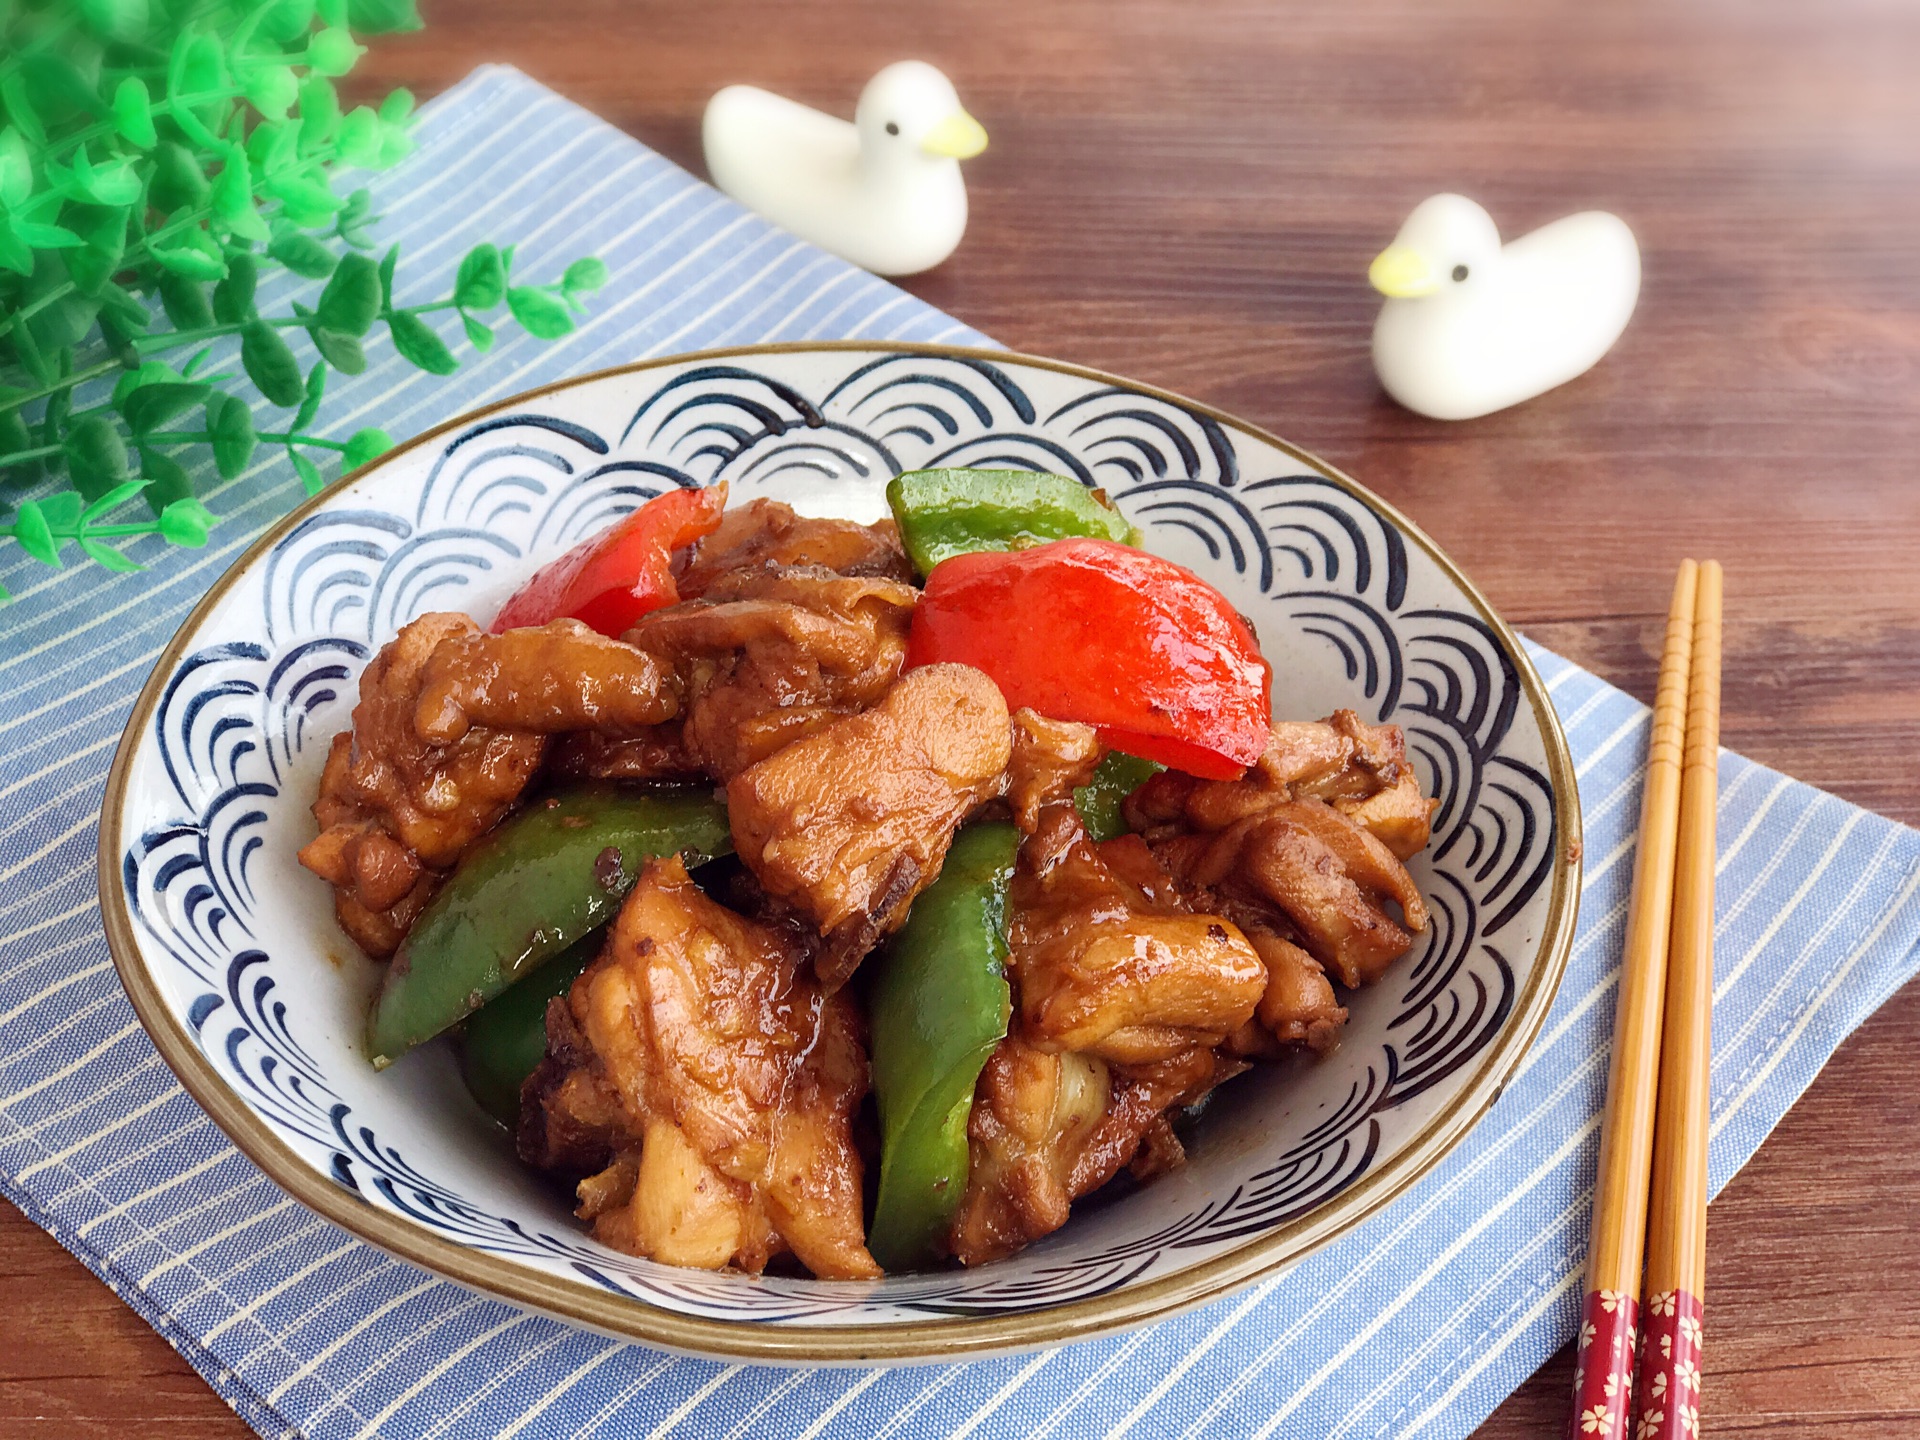 Miki's Food Archives : Braised Chicken with Chu Hou Paste 柱侯酱焖鸡／鸡翅